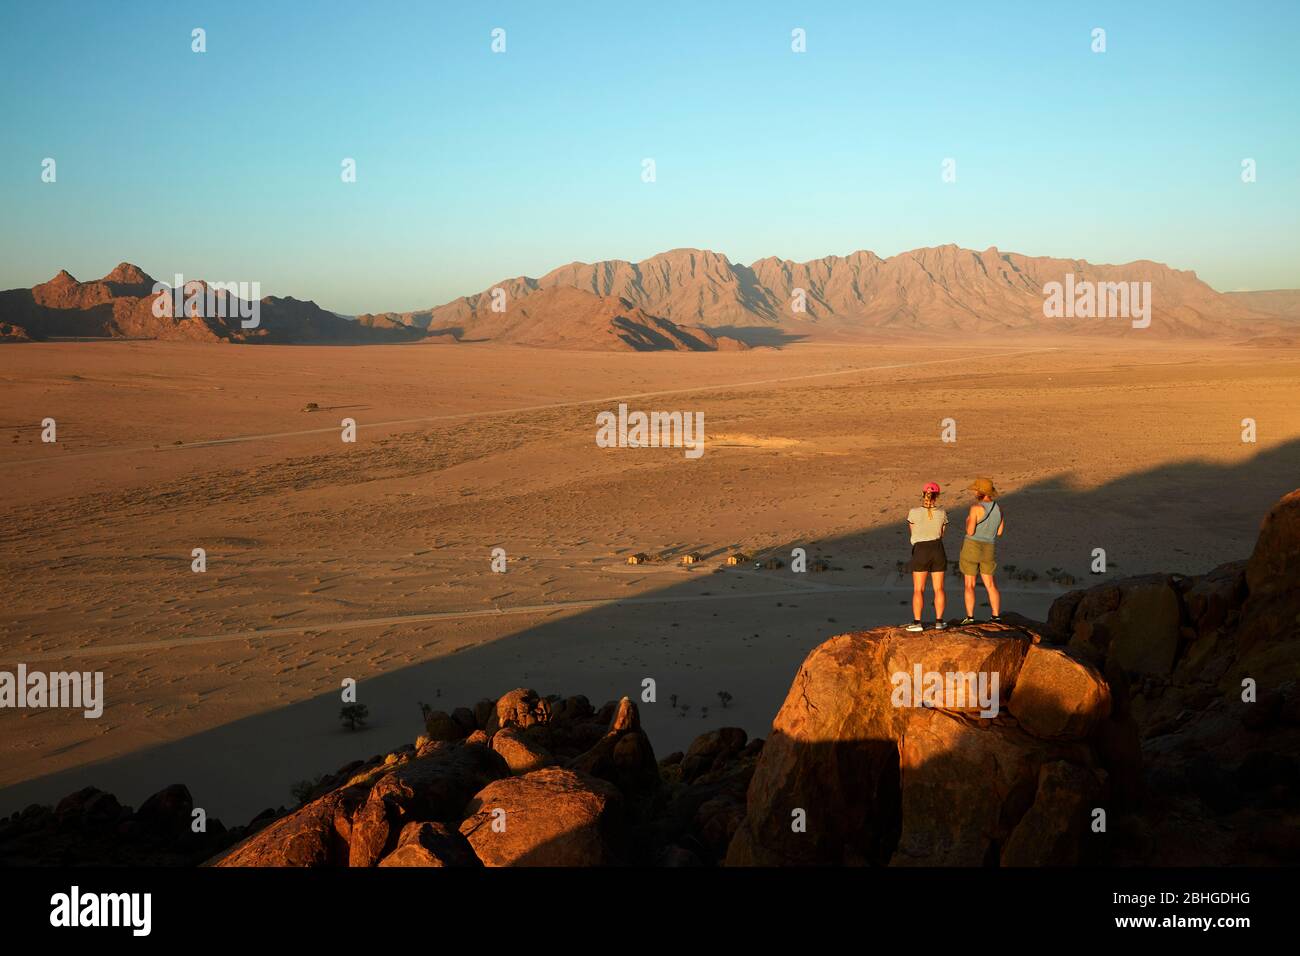 Women looking at view of mountains and Desert Camp, from high on a rock koppie, Sesriem, Namib Desert, Namibia, Africa (model released) Stock Photo